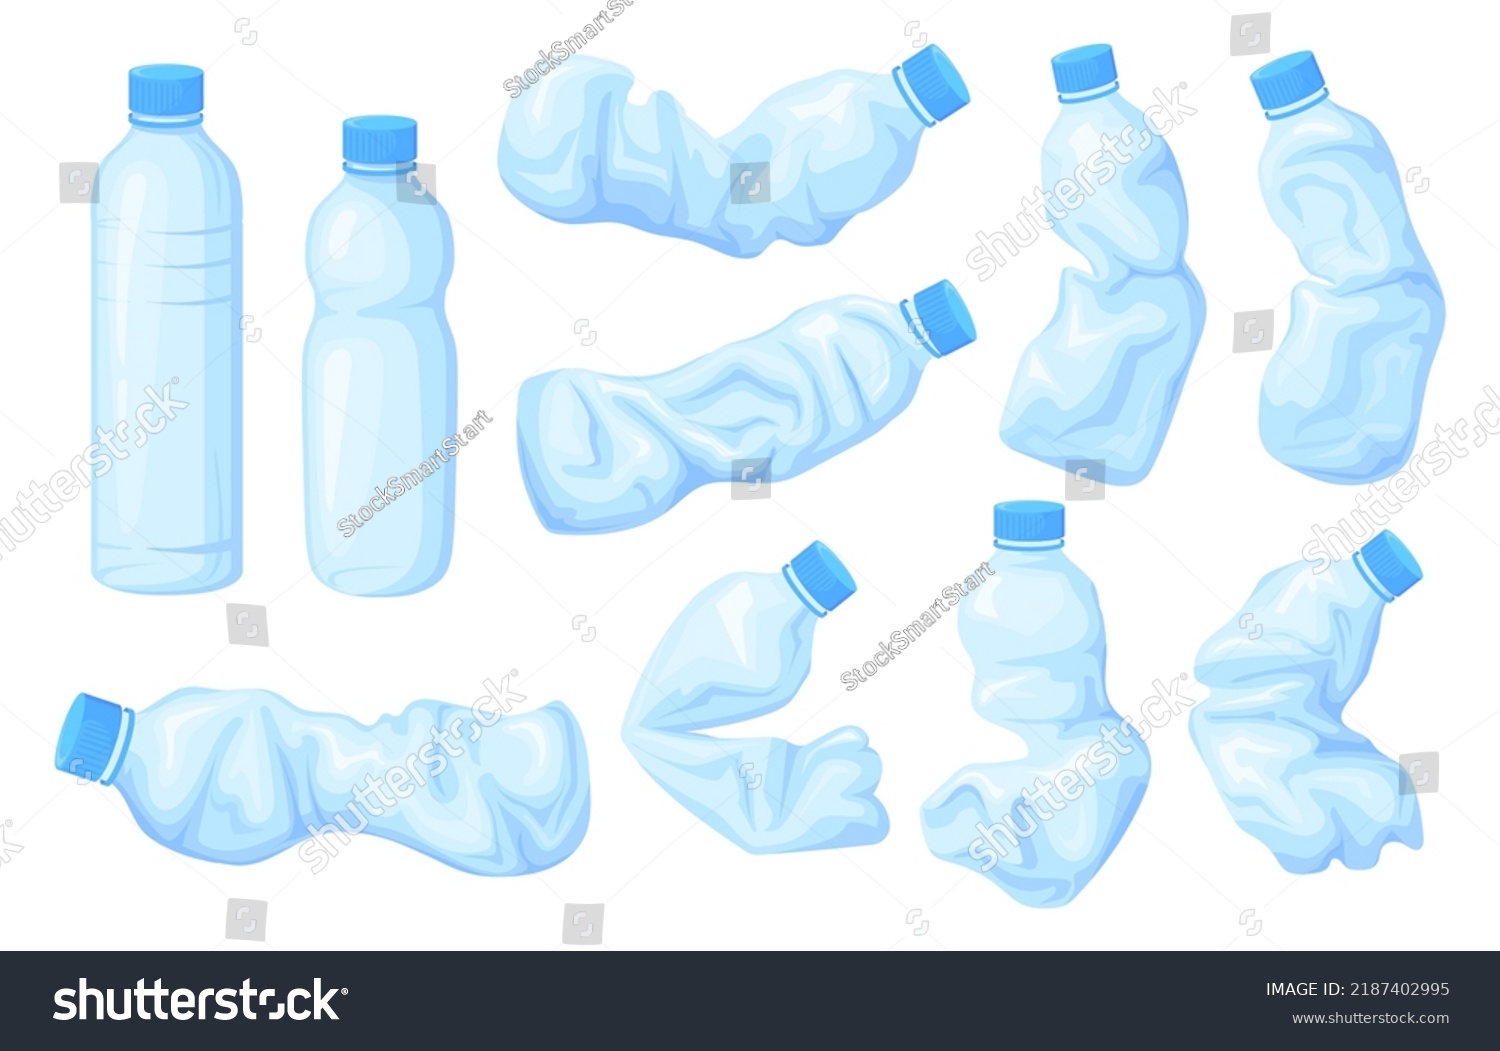 SVG of Crumpled bottles. Unhygienic plastic crush bottle water, used broken bottled trash garbage refuse plastics discarded sea waste environment contamination, neat vector illustration of bottle recycle svg